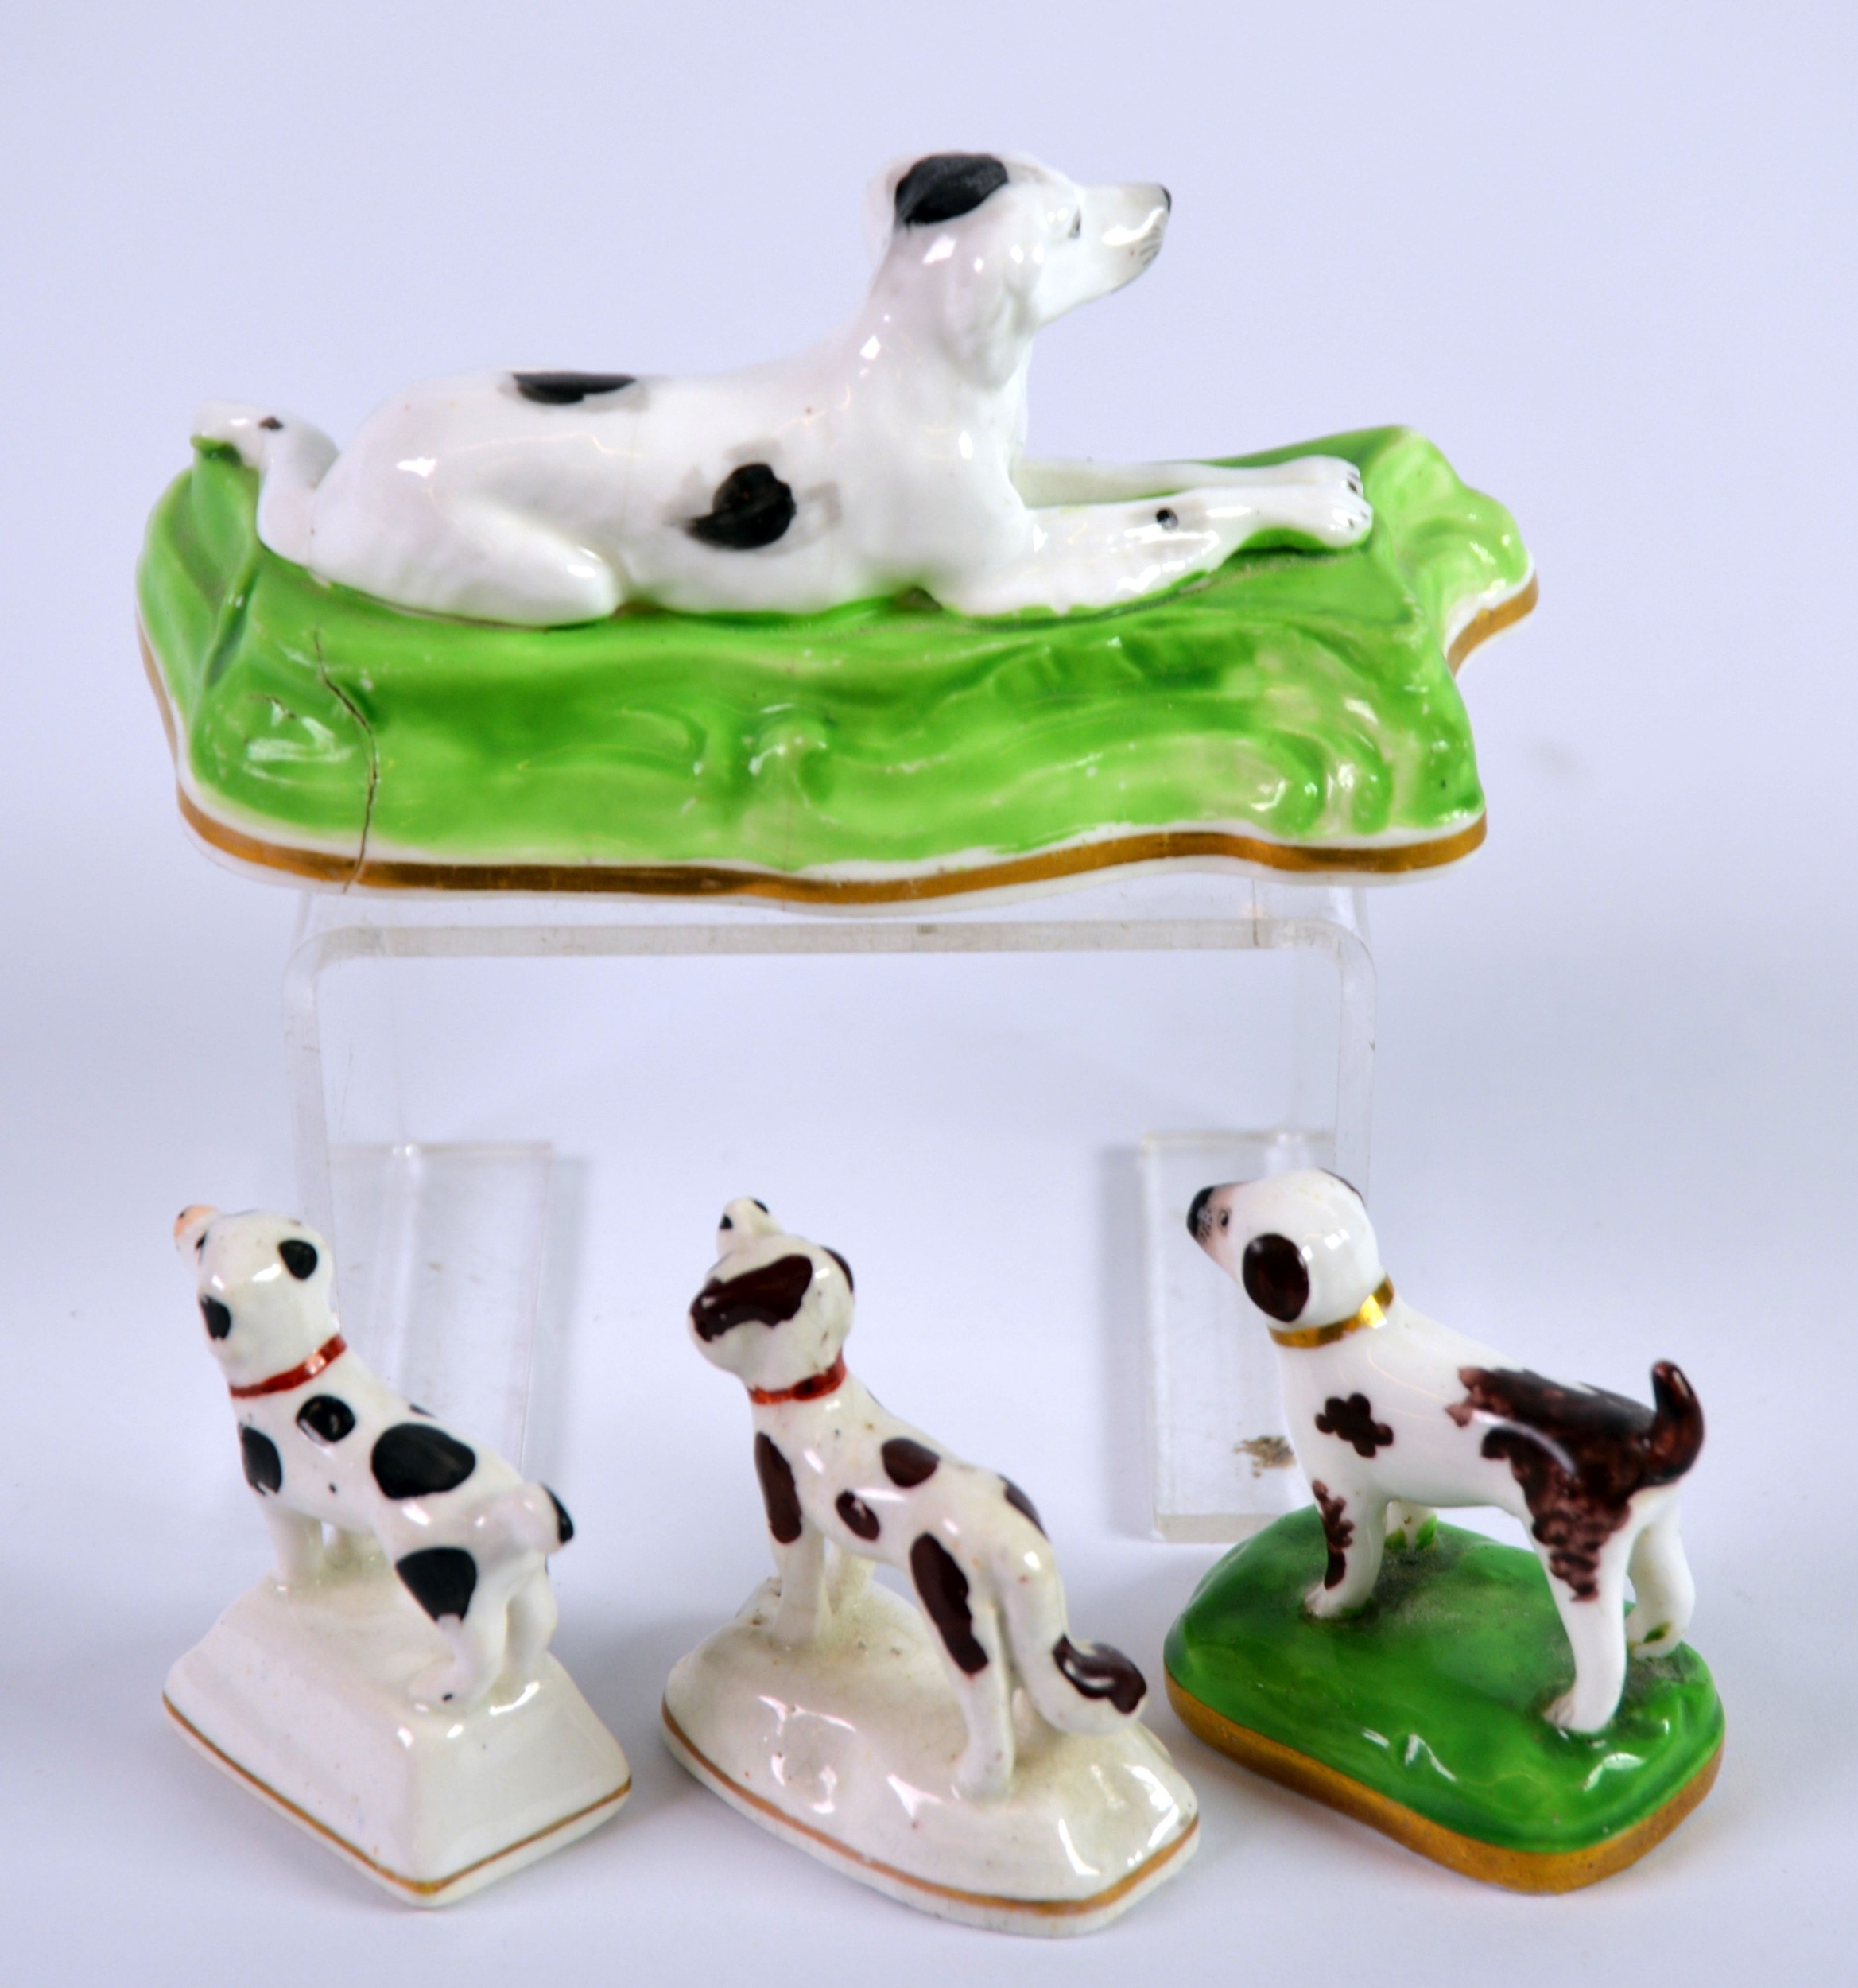 FOUR NINETEENTH CENTURY STAFFORDSHIRE PORCELAIN MODELS OF DOGS, comprising: THREE SMALL STANDING - Image 2 of 2